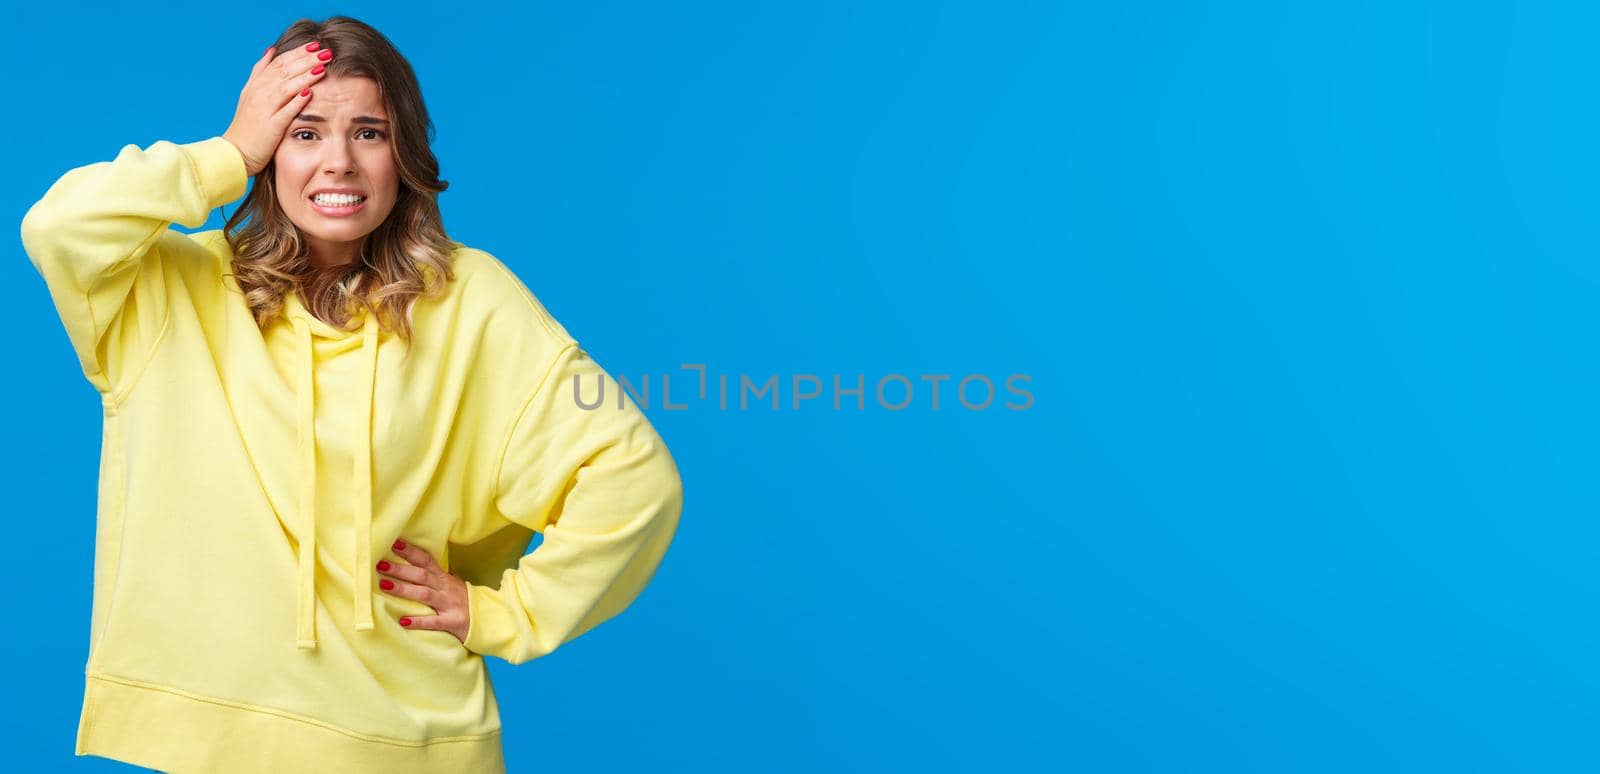 Embarrassed and worried girl bumped into car, feel anxious and concerned, touch head troubled, grimacing with awkward grin, face problematic situation, stand blue background by Benzoix